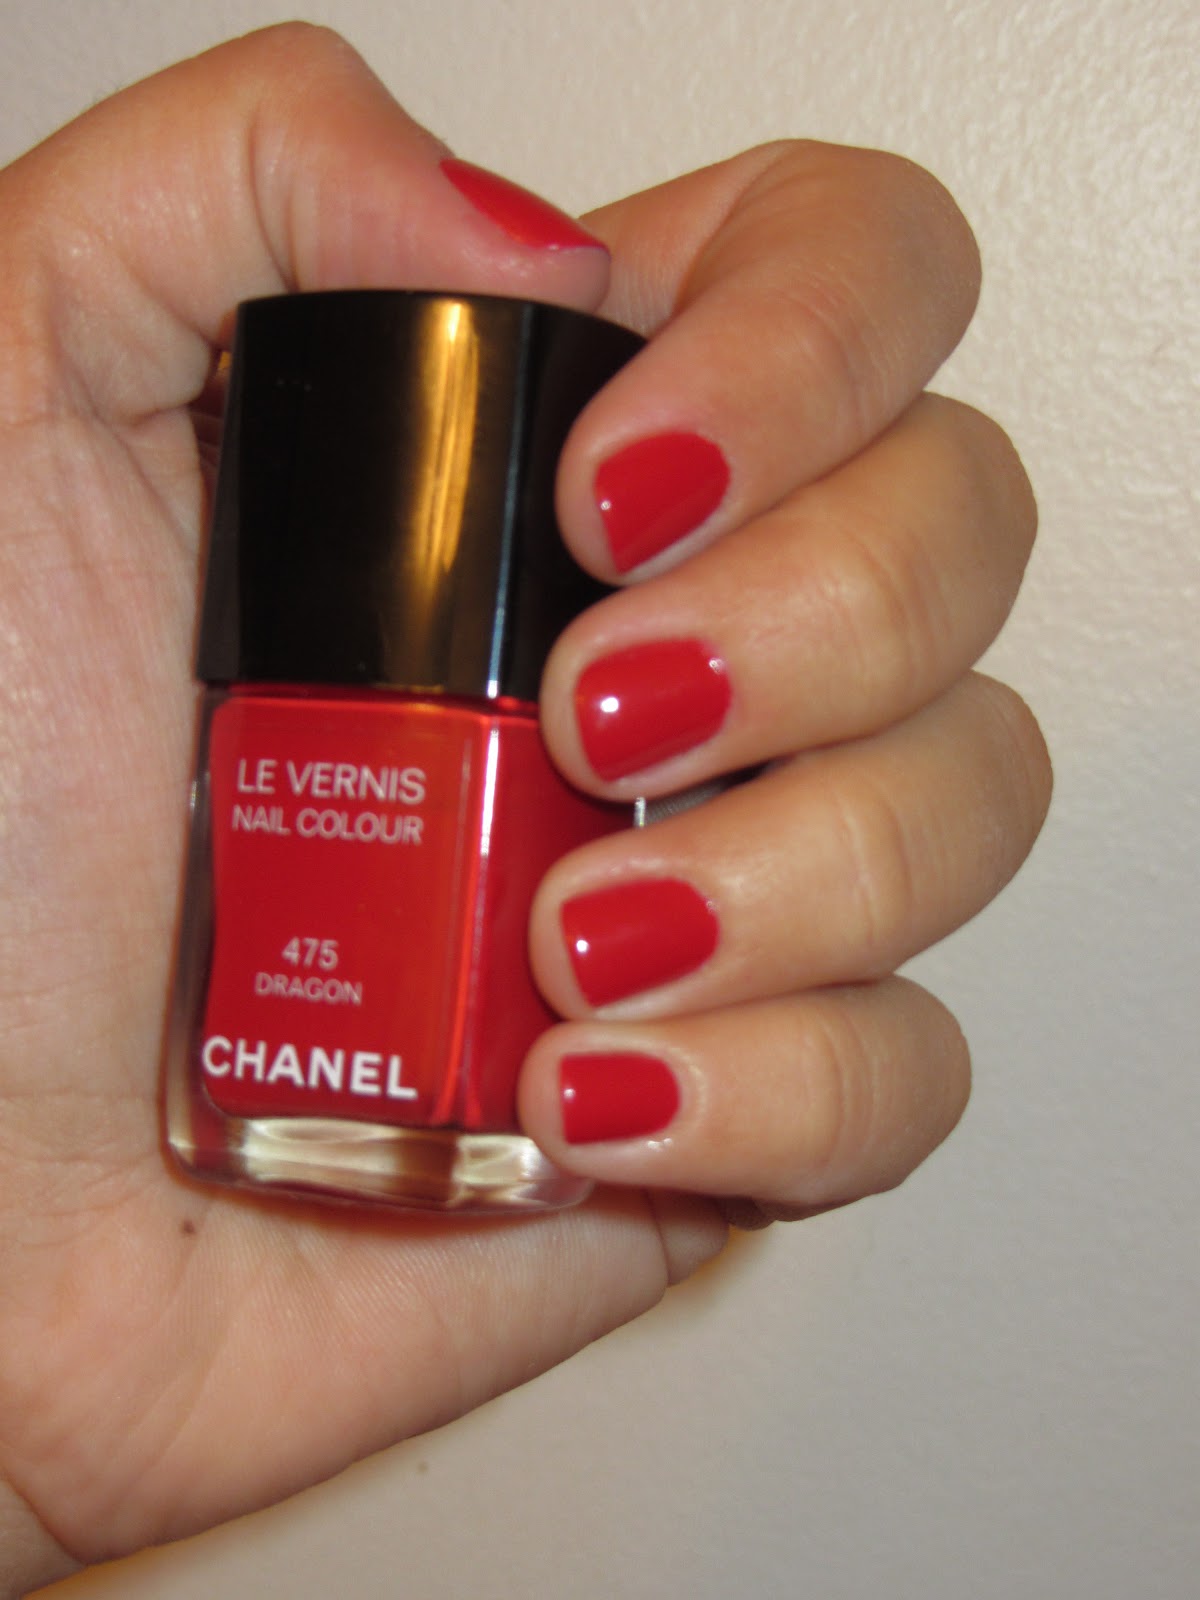 Chanel Dragon: Nail Polish Swatches and Review